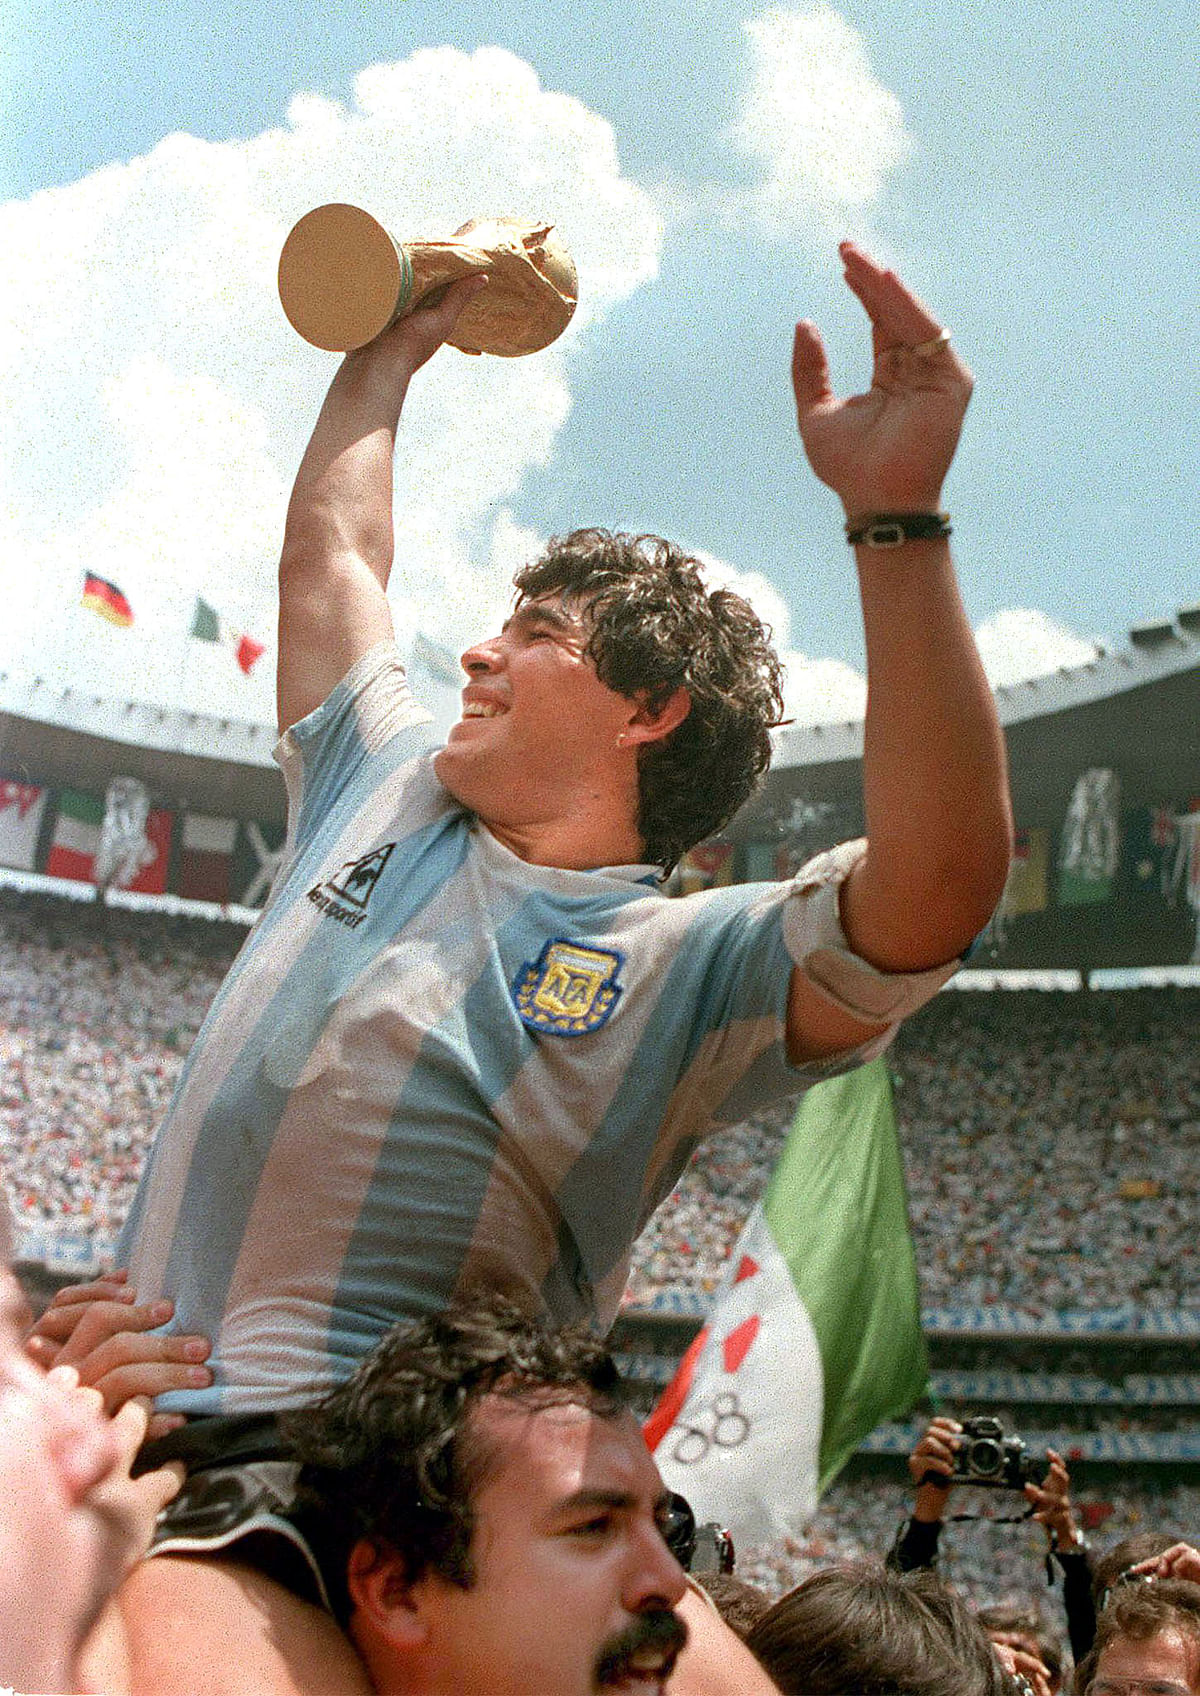 Argentina's soccer team captain Diego Maradona brandishes the World Cup trophy after his team beat West Germany 3-2 in the final 29 June 1986 at the Azteca stadium in Mexico City. Photo: AFP